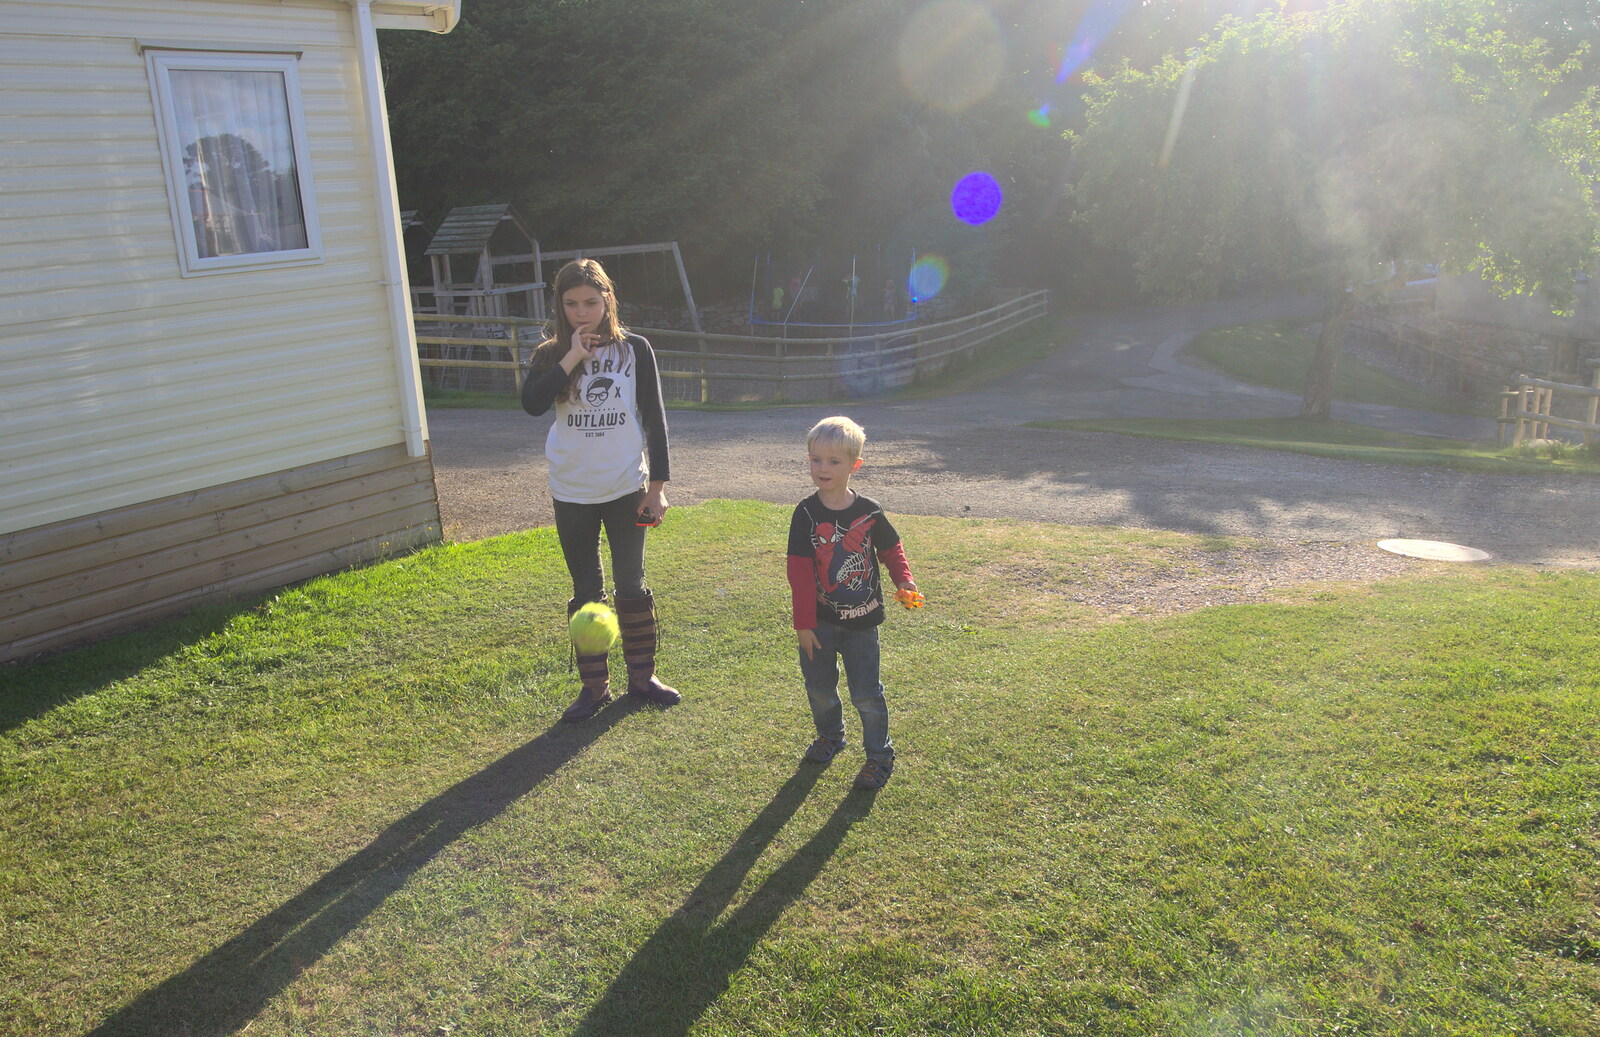 Sydney and Harry from Camping With Sean, Ashburton, Devon - 8th August 2016